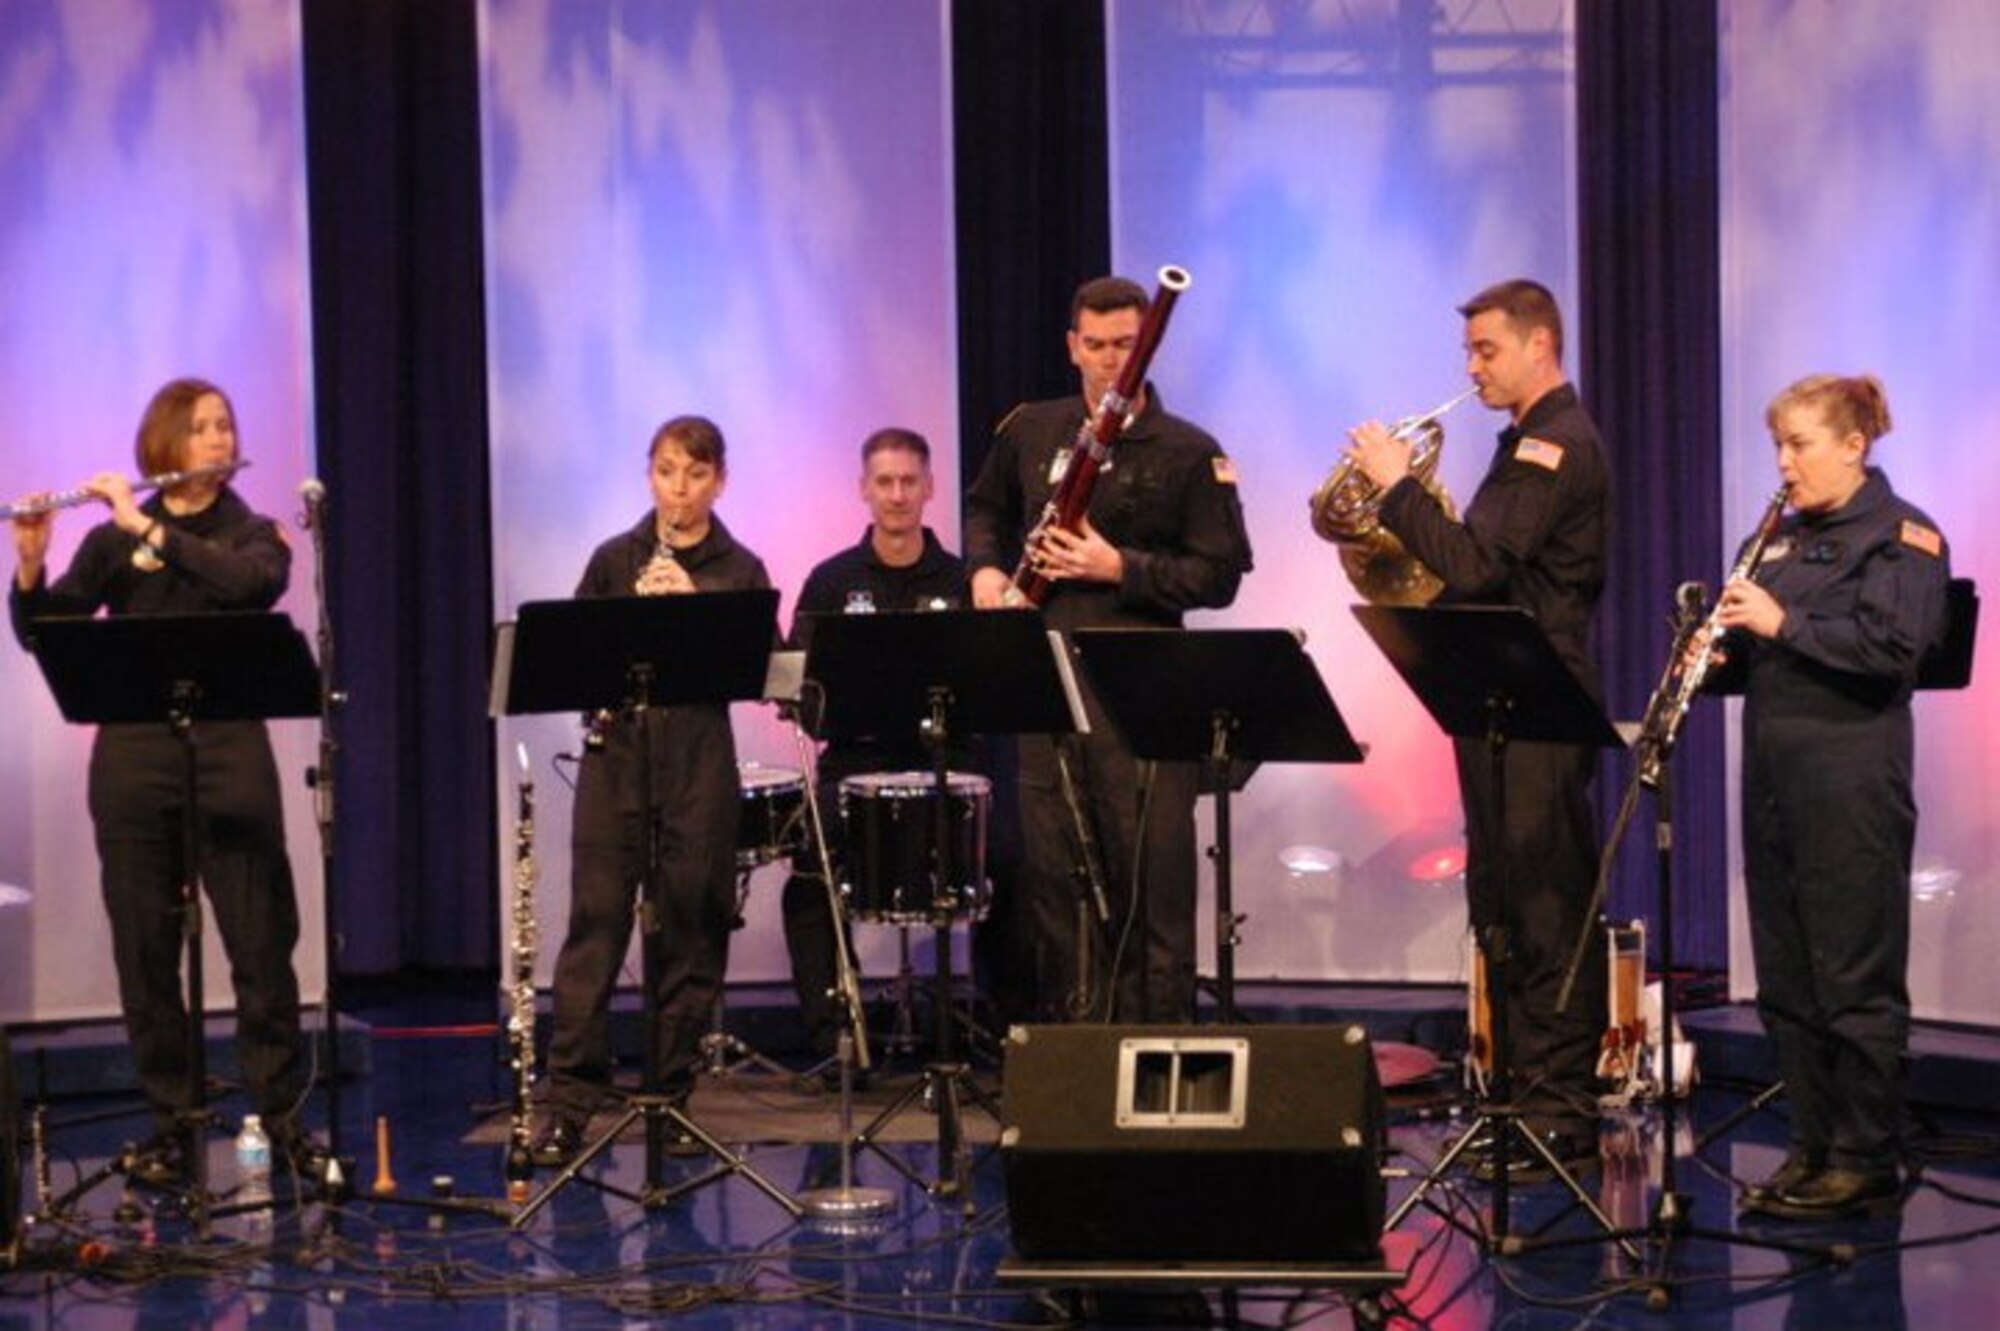 Academy Winds performs on the morning show of KARE Channel 11 in Minneapolis/St. Paul, MN. This appearance helped to spread the word about the landmark upcoming performance with the St. Cloud State University Concert Band the following evening.